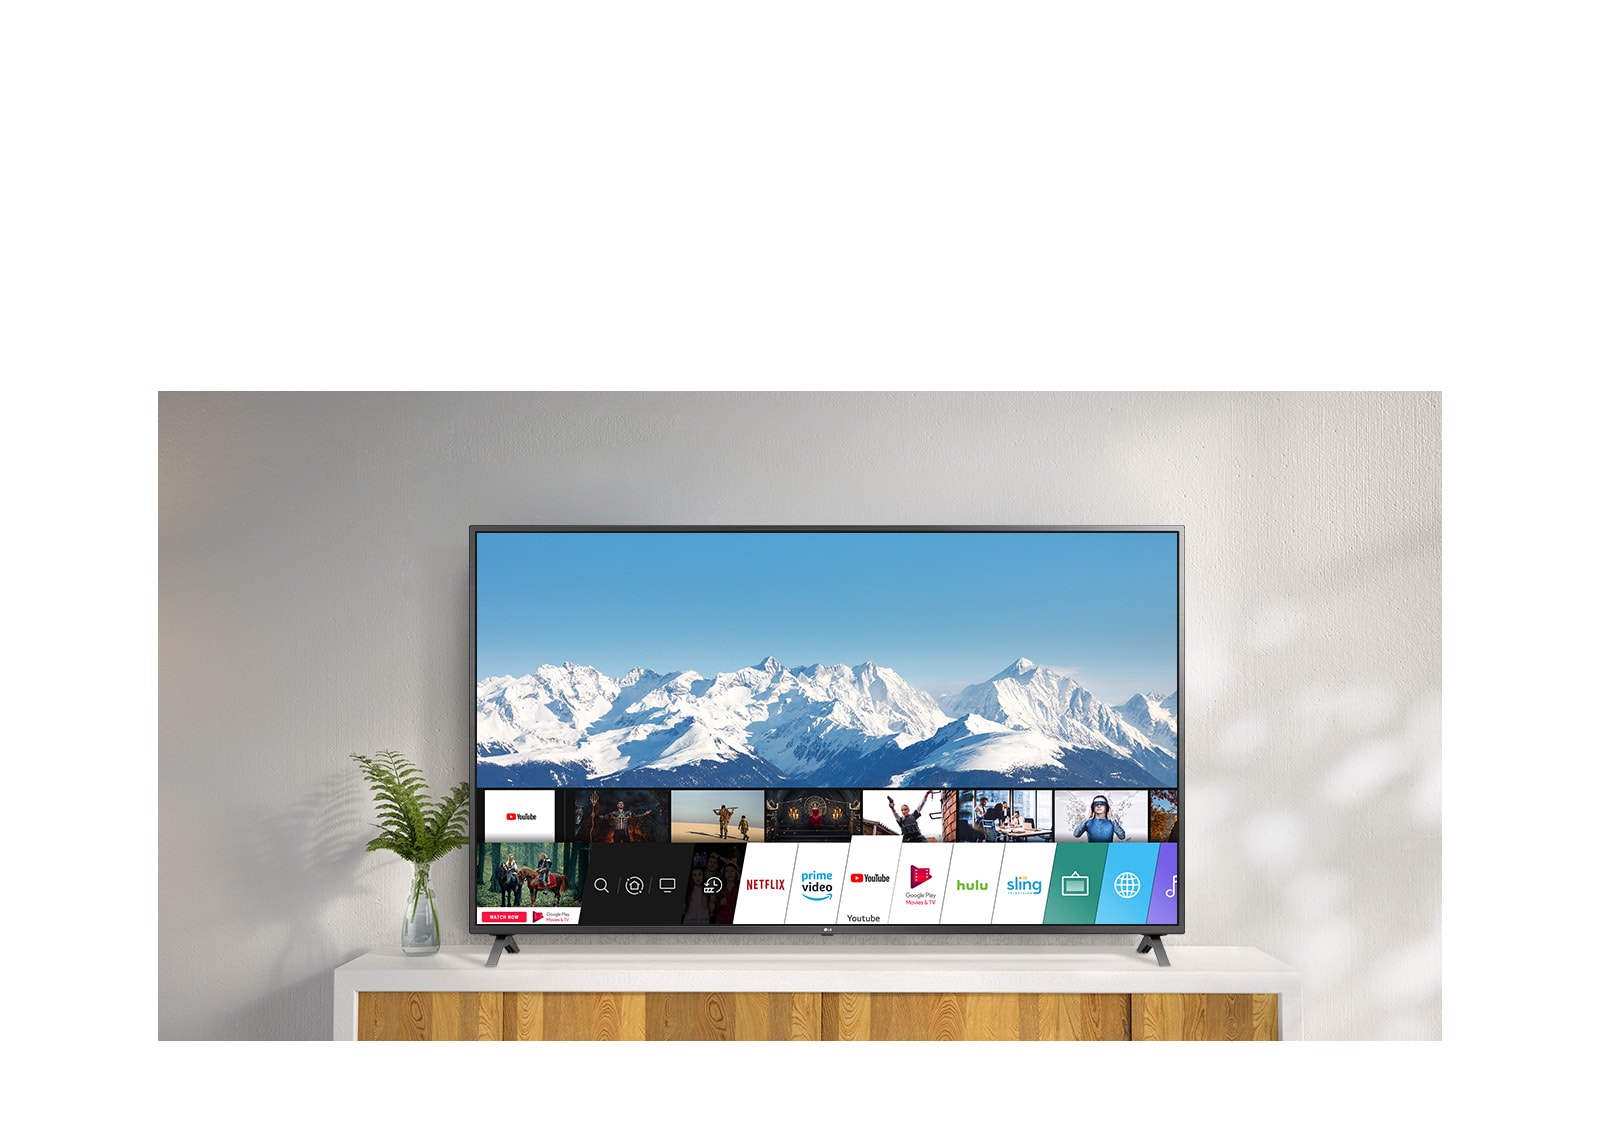 TV standing on a white stand against a white wall. TV screen shows home screen with webOS.